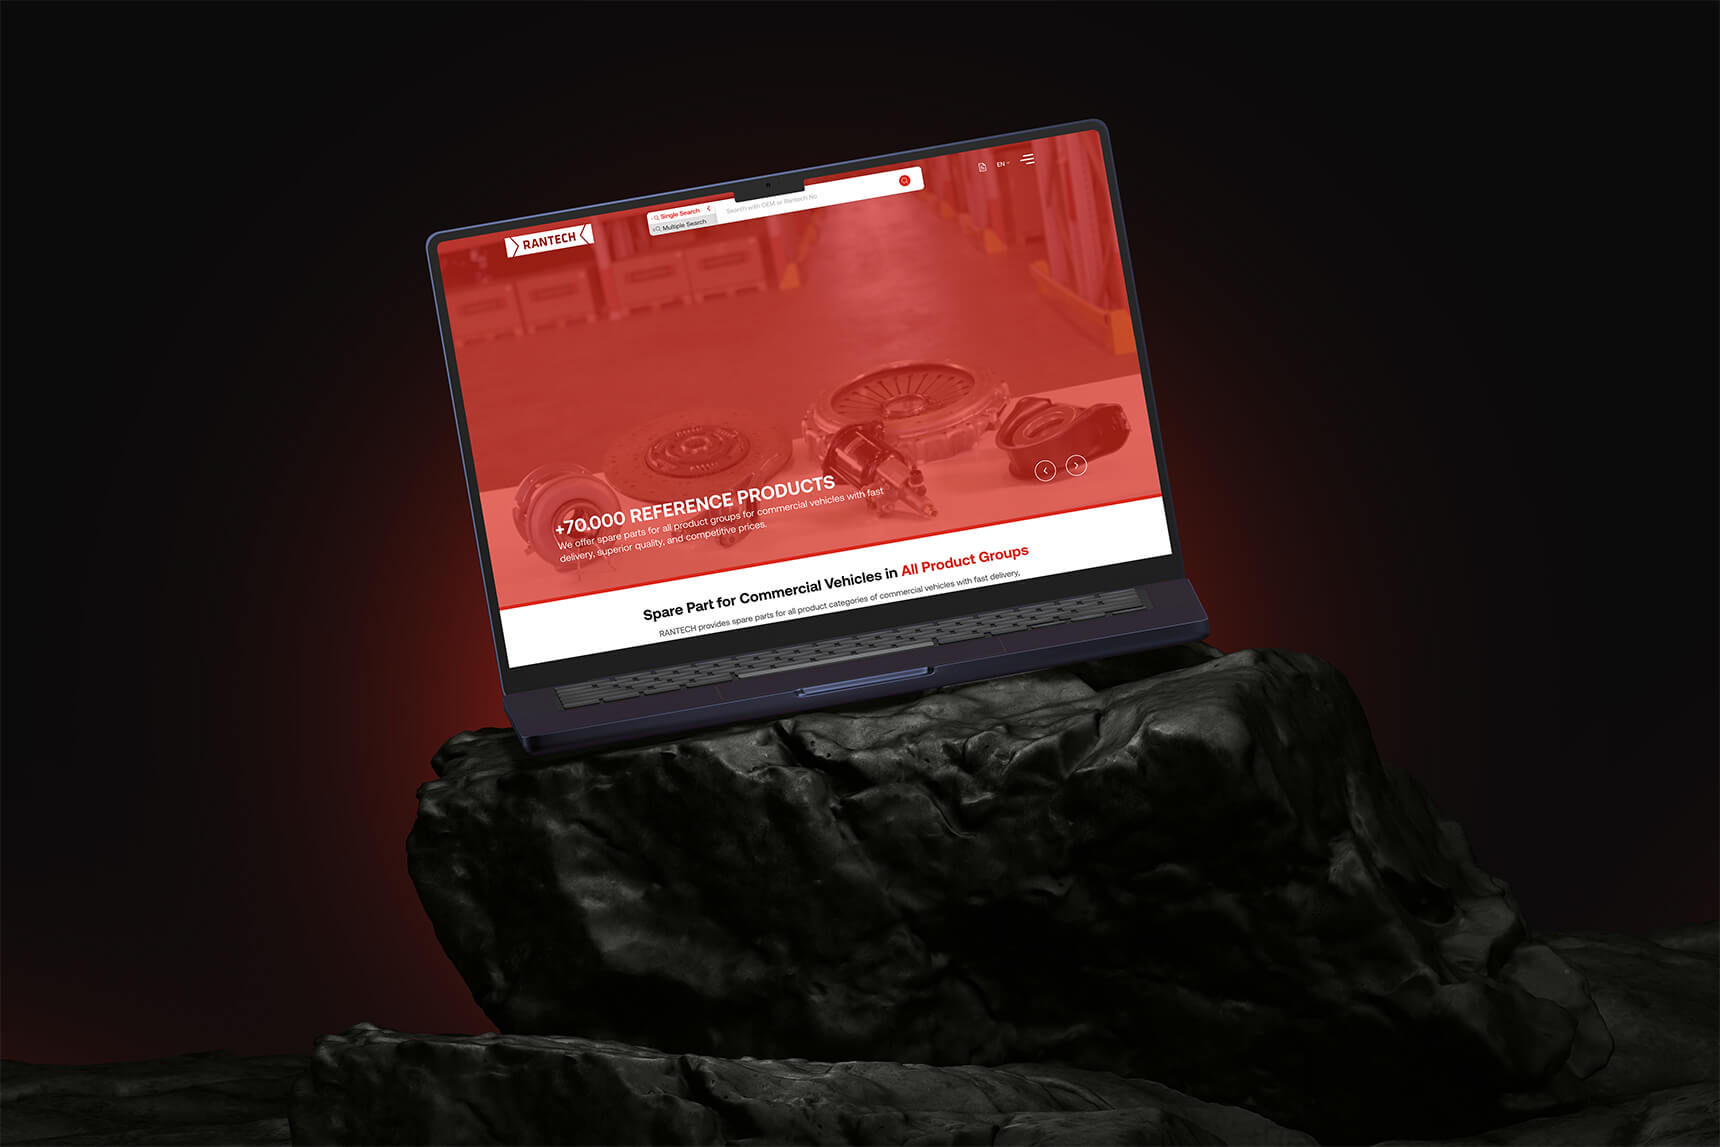 Rantech-metin  1-5- web-pages-metin 2-6- mobil-screen-8- home-page-9- mobil-screen-10- Macbook Pro Mockup